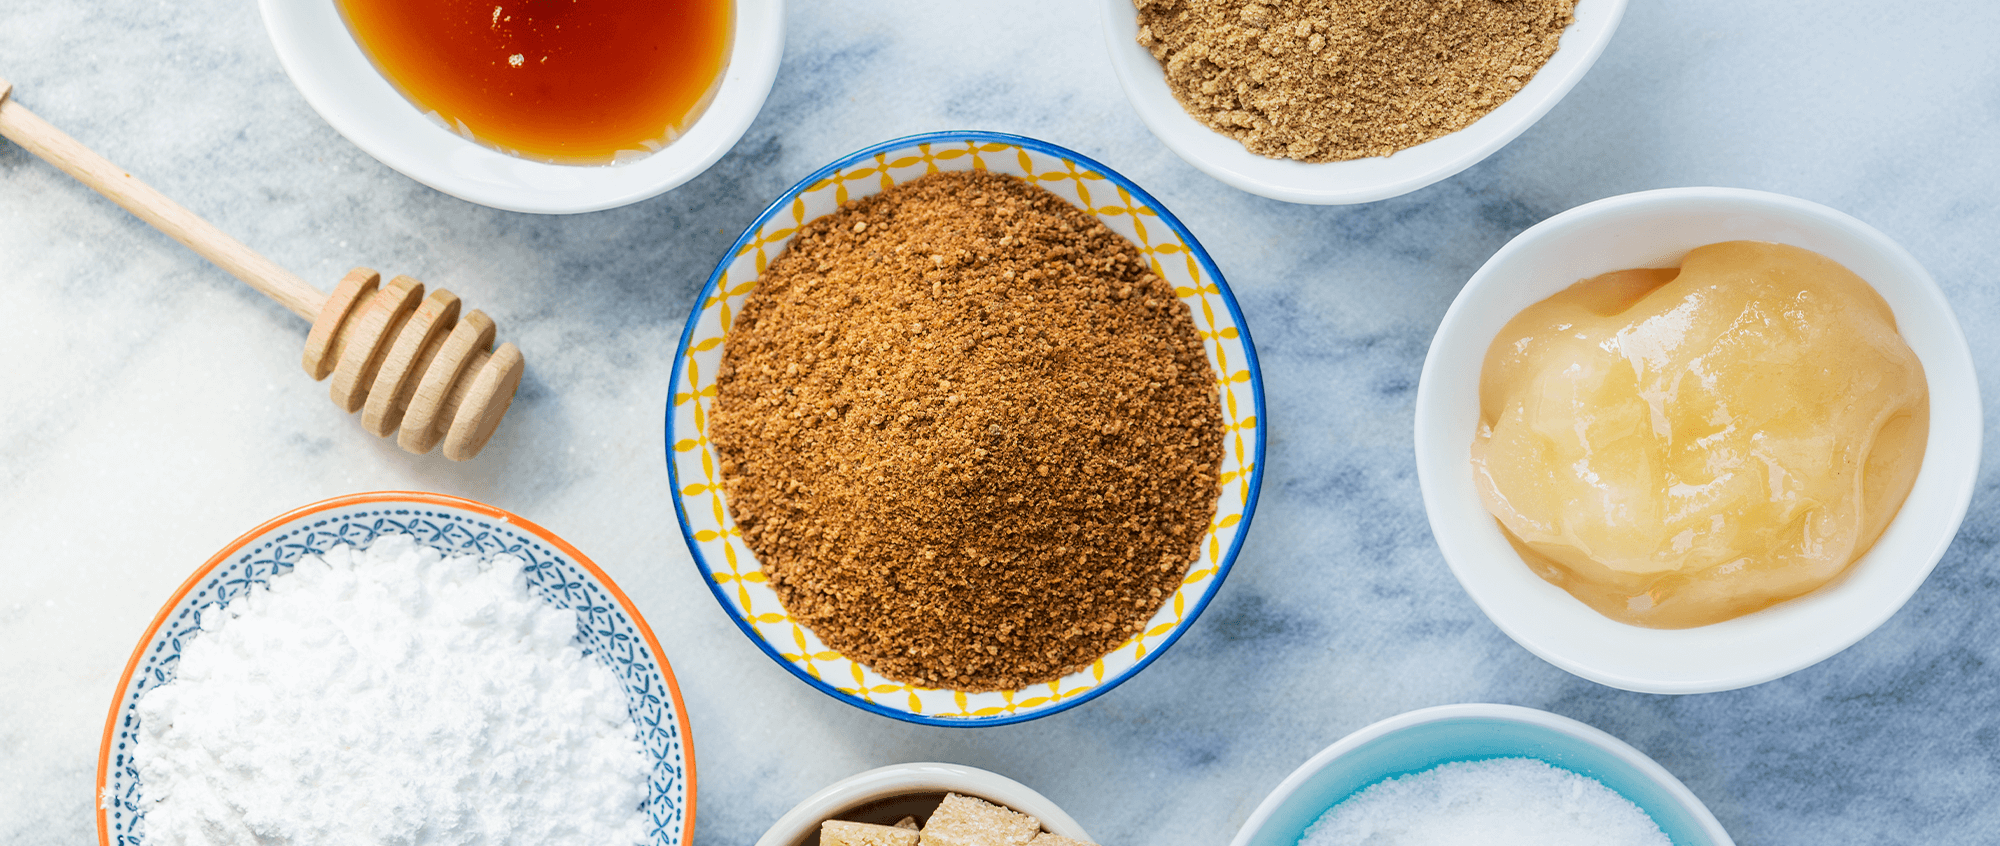 A guide to sugar substitutes for sugar-free baking 